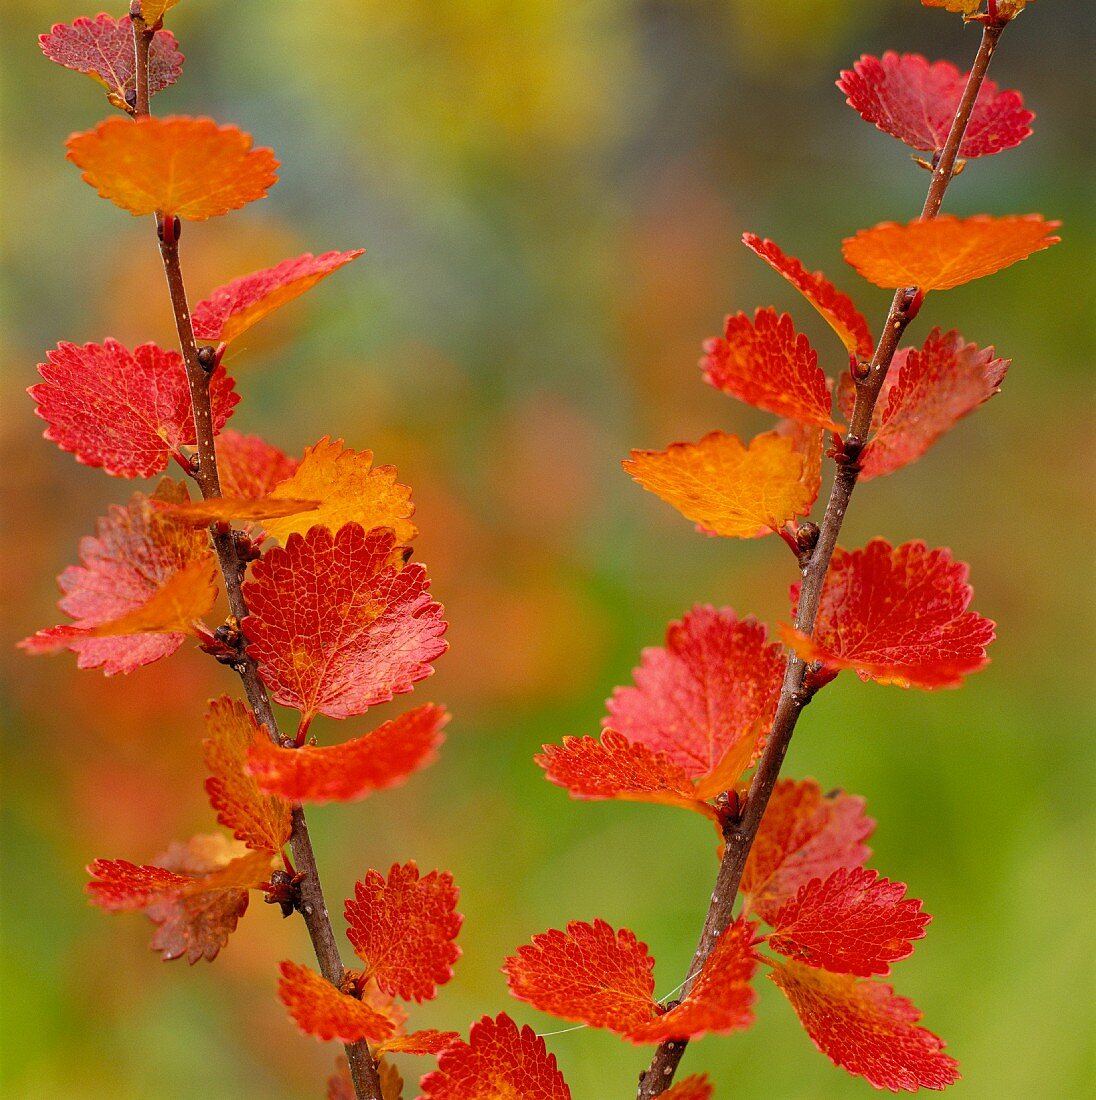 Autumn coloured birch leaves, close-up.